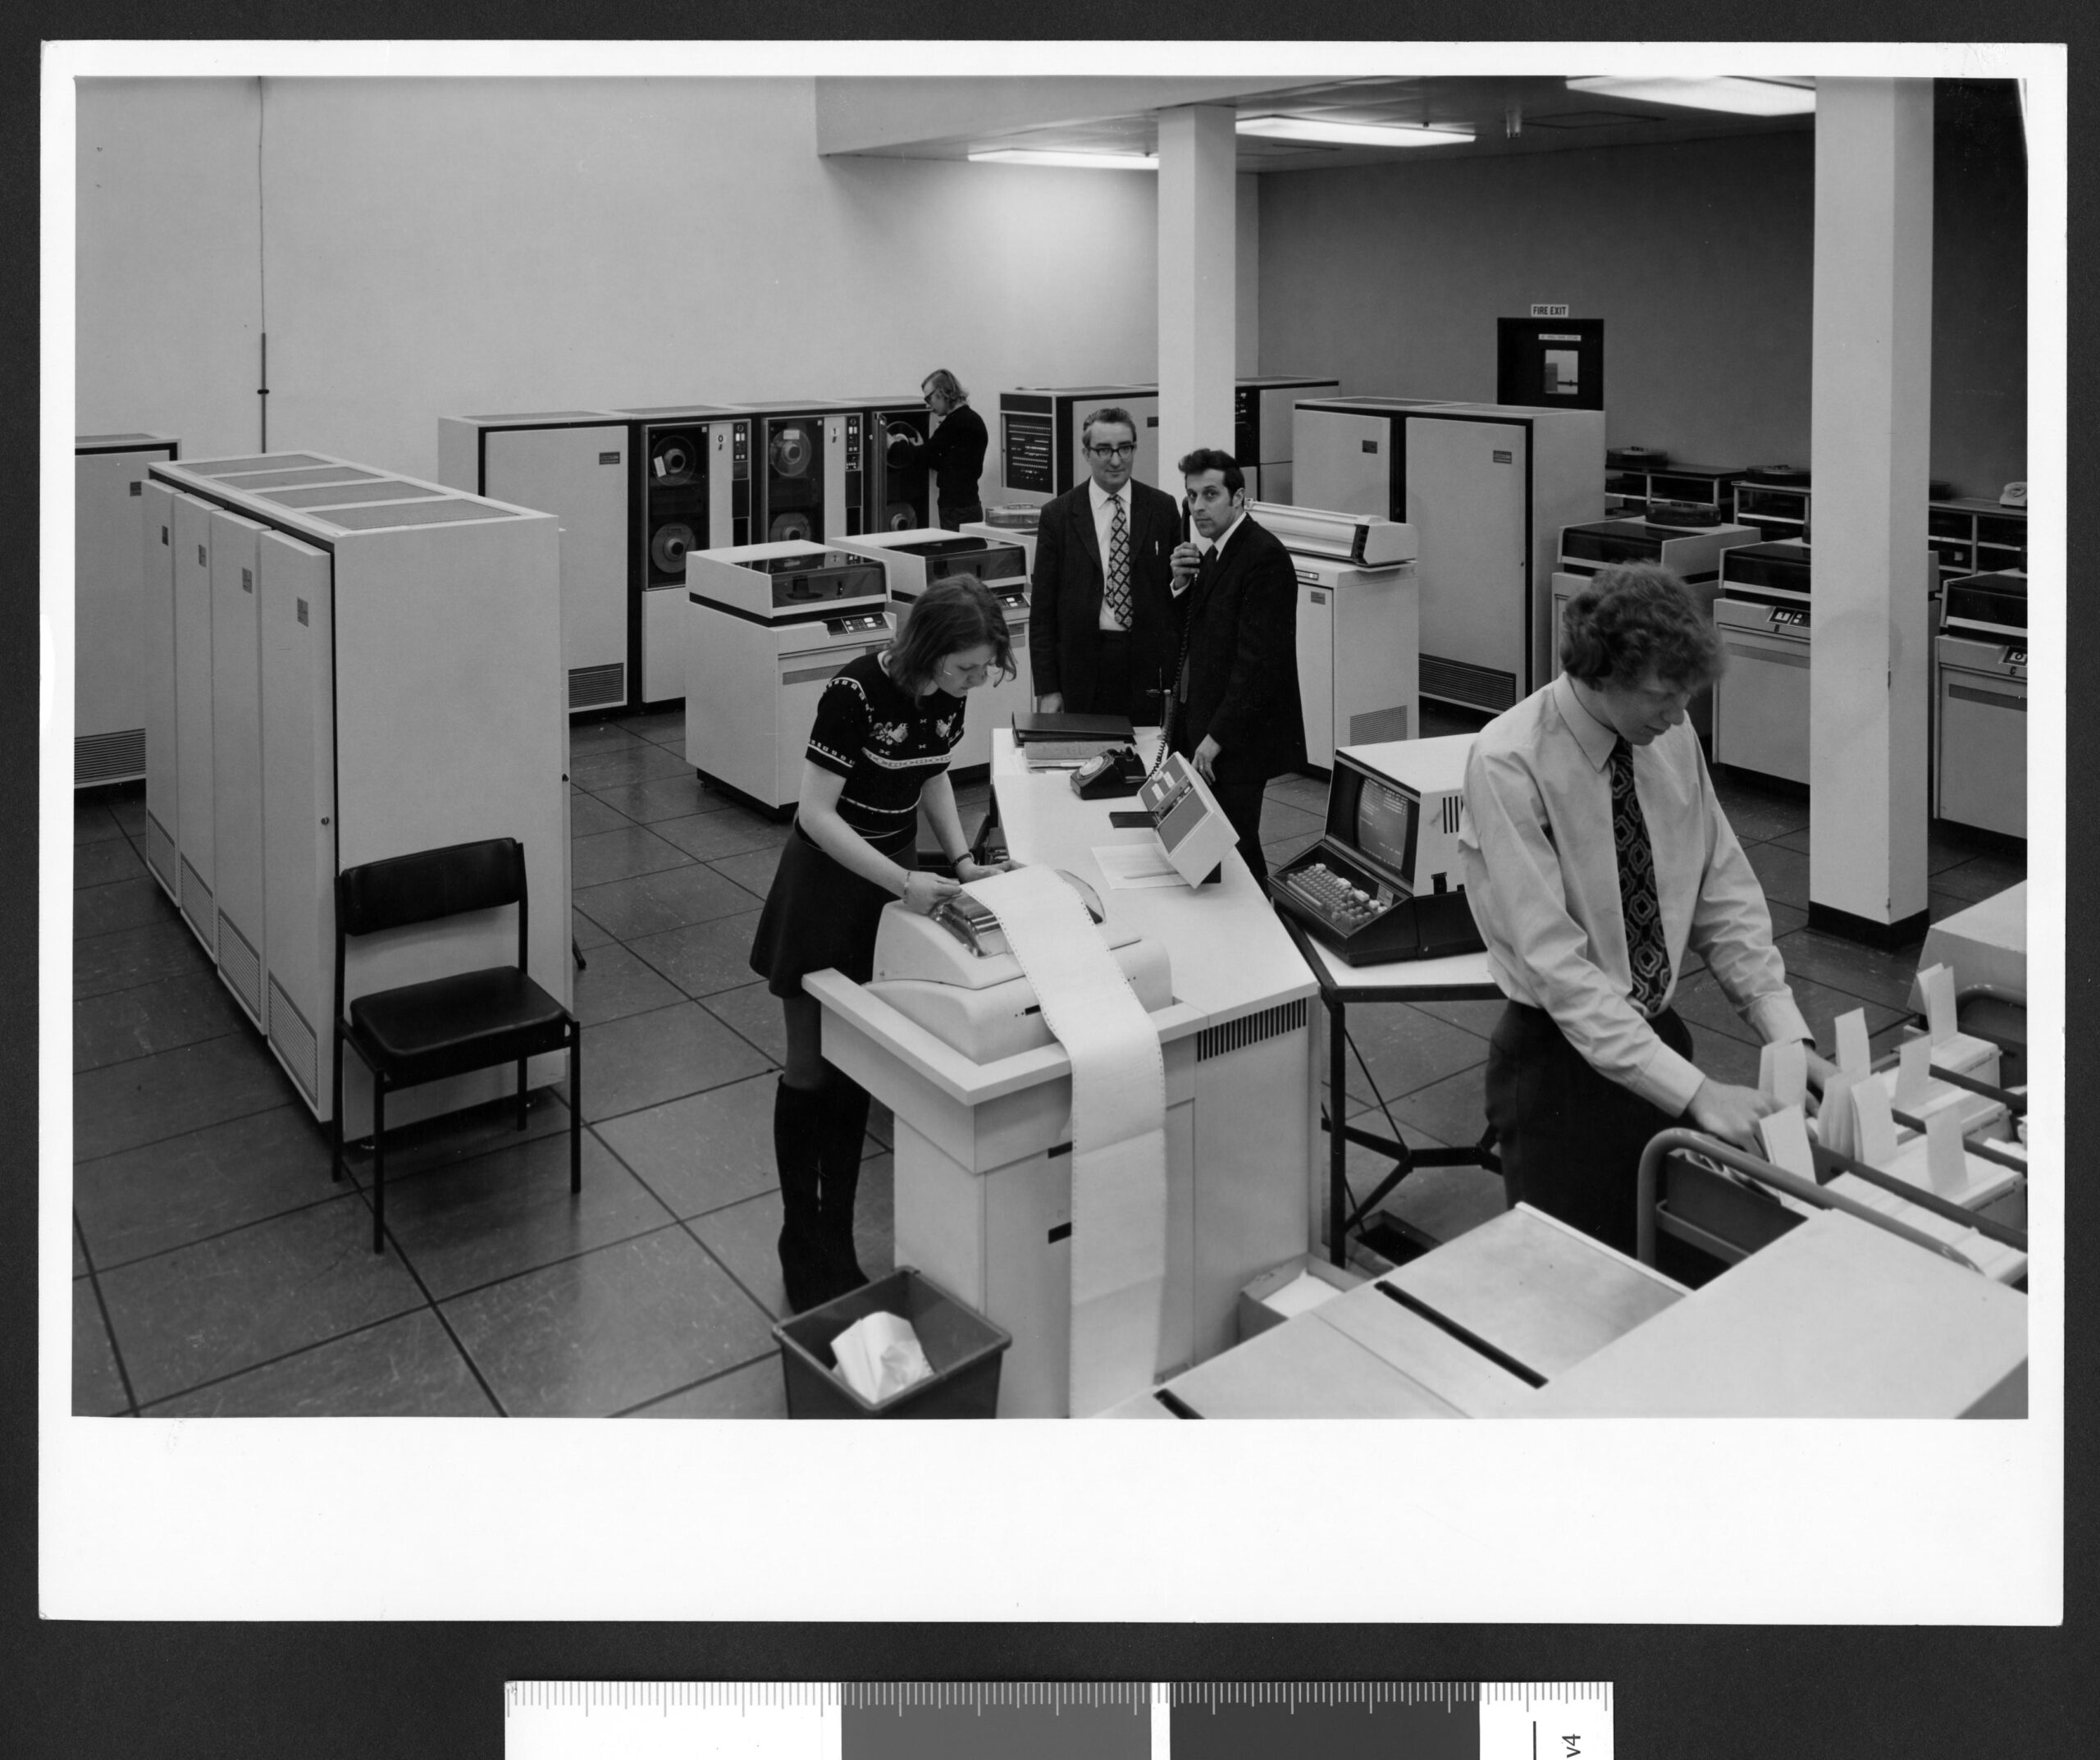 Students using the ICL System 4-50 computer [1], late 1960s